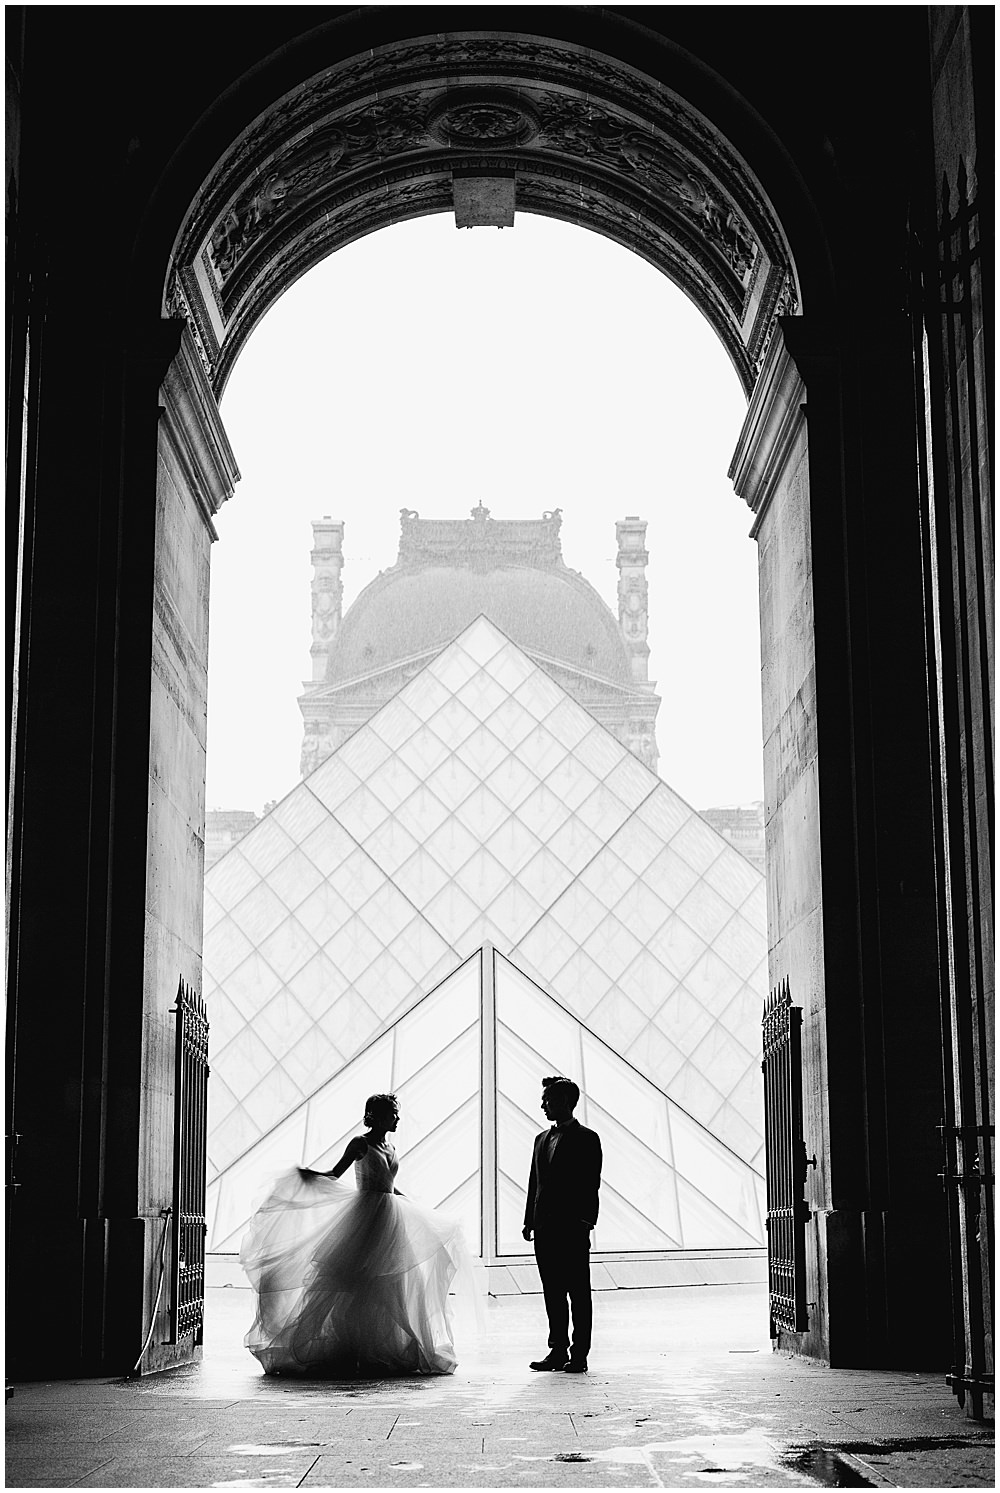 Top 10 Paris Wedding Photography Locations, The Louvre, Paris wedding photographer, 